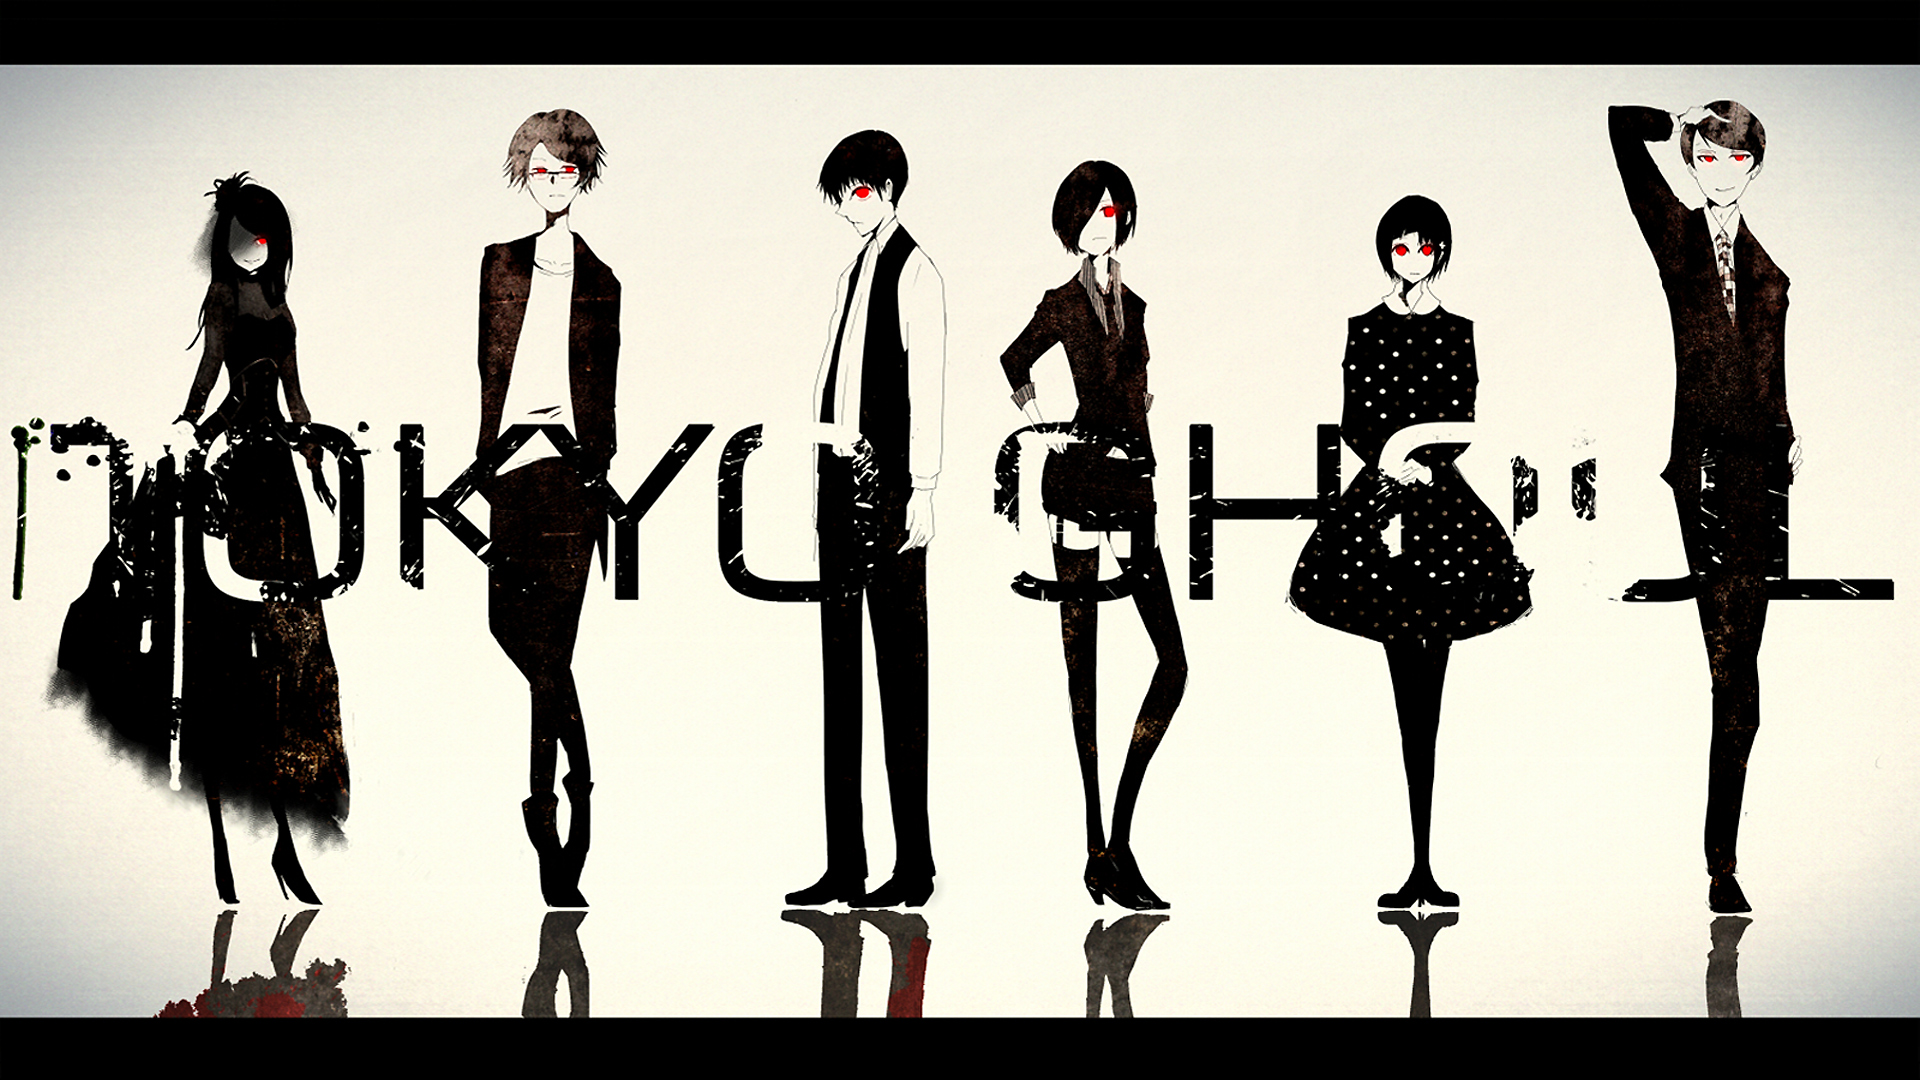 tokyo ghoul anime mask characters hd 1920x1080 1080p and compatible